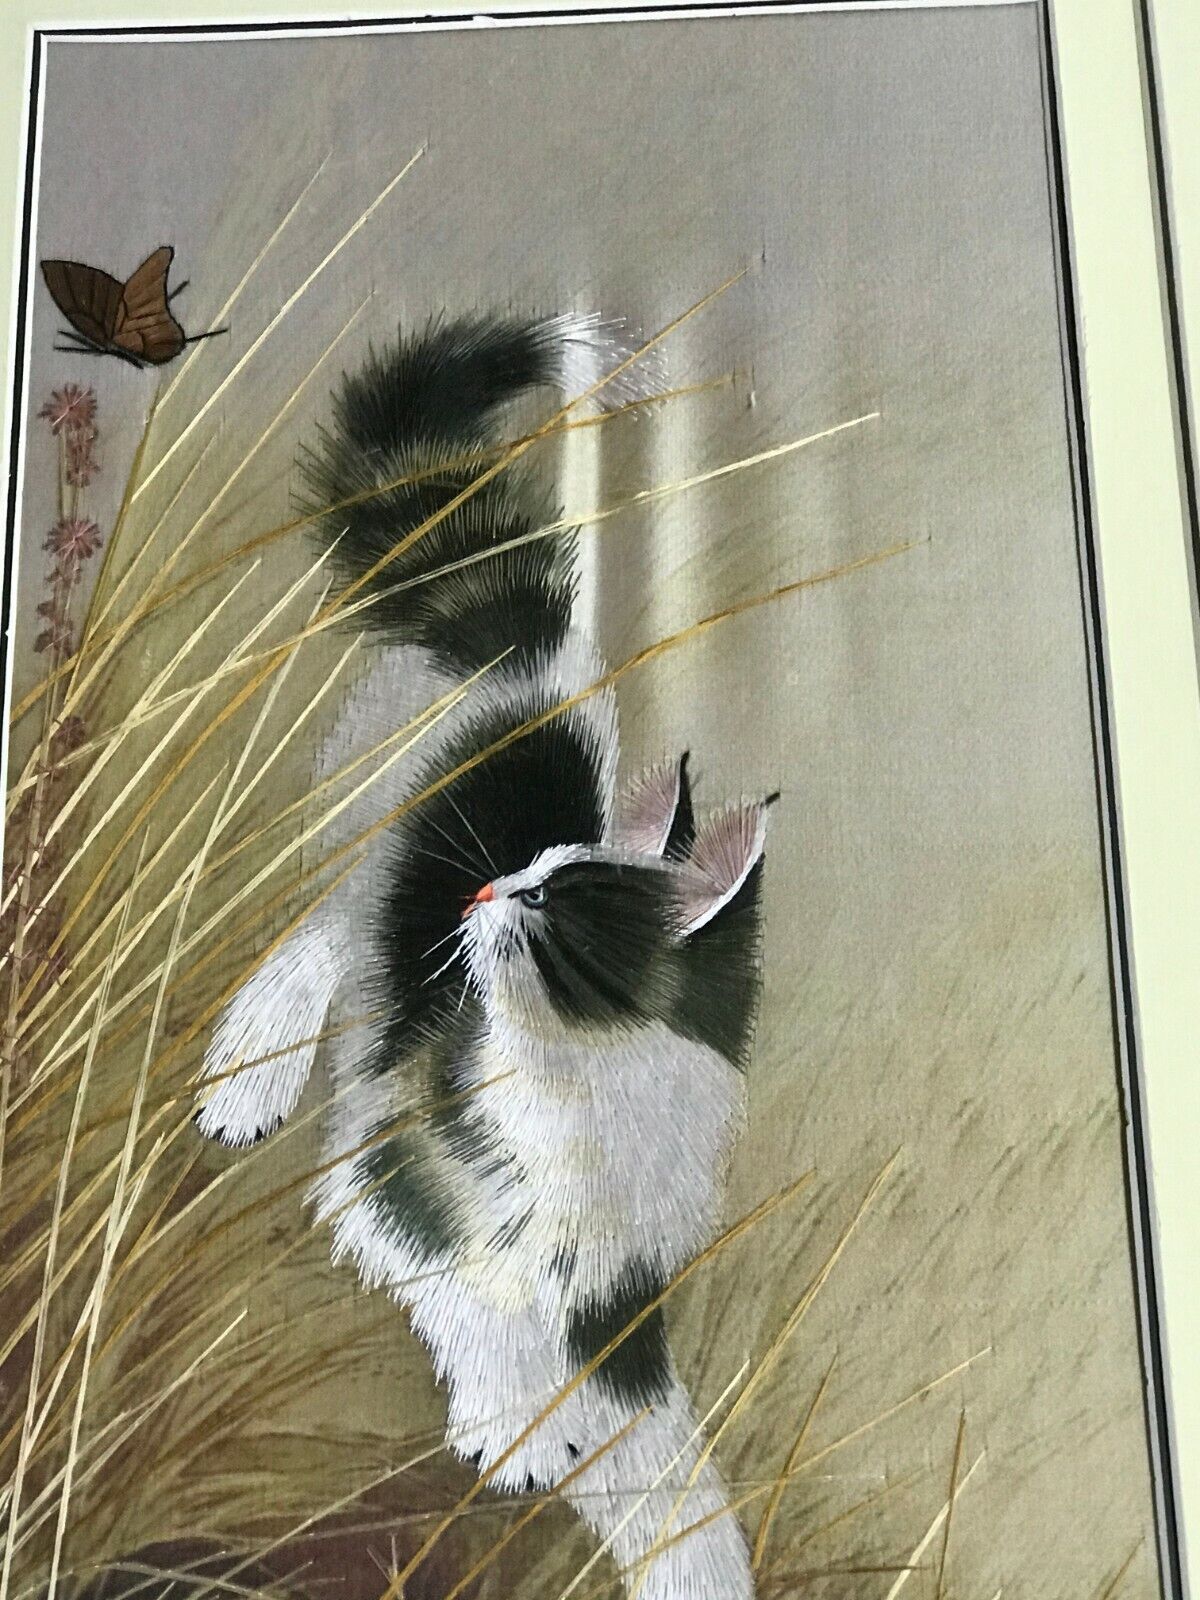 Chinese handmade embroidery art of adorable kitten with frame